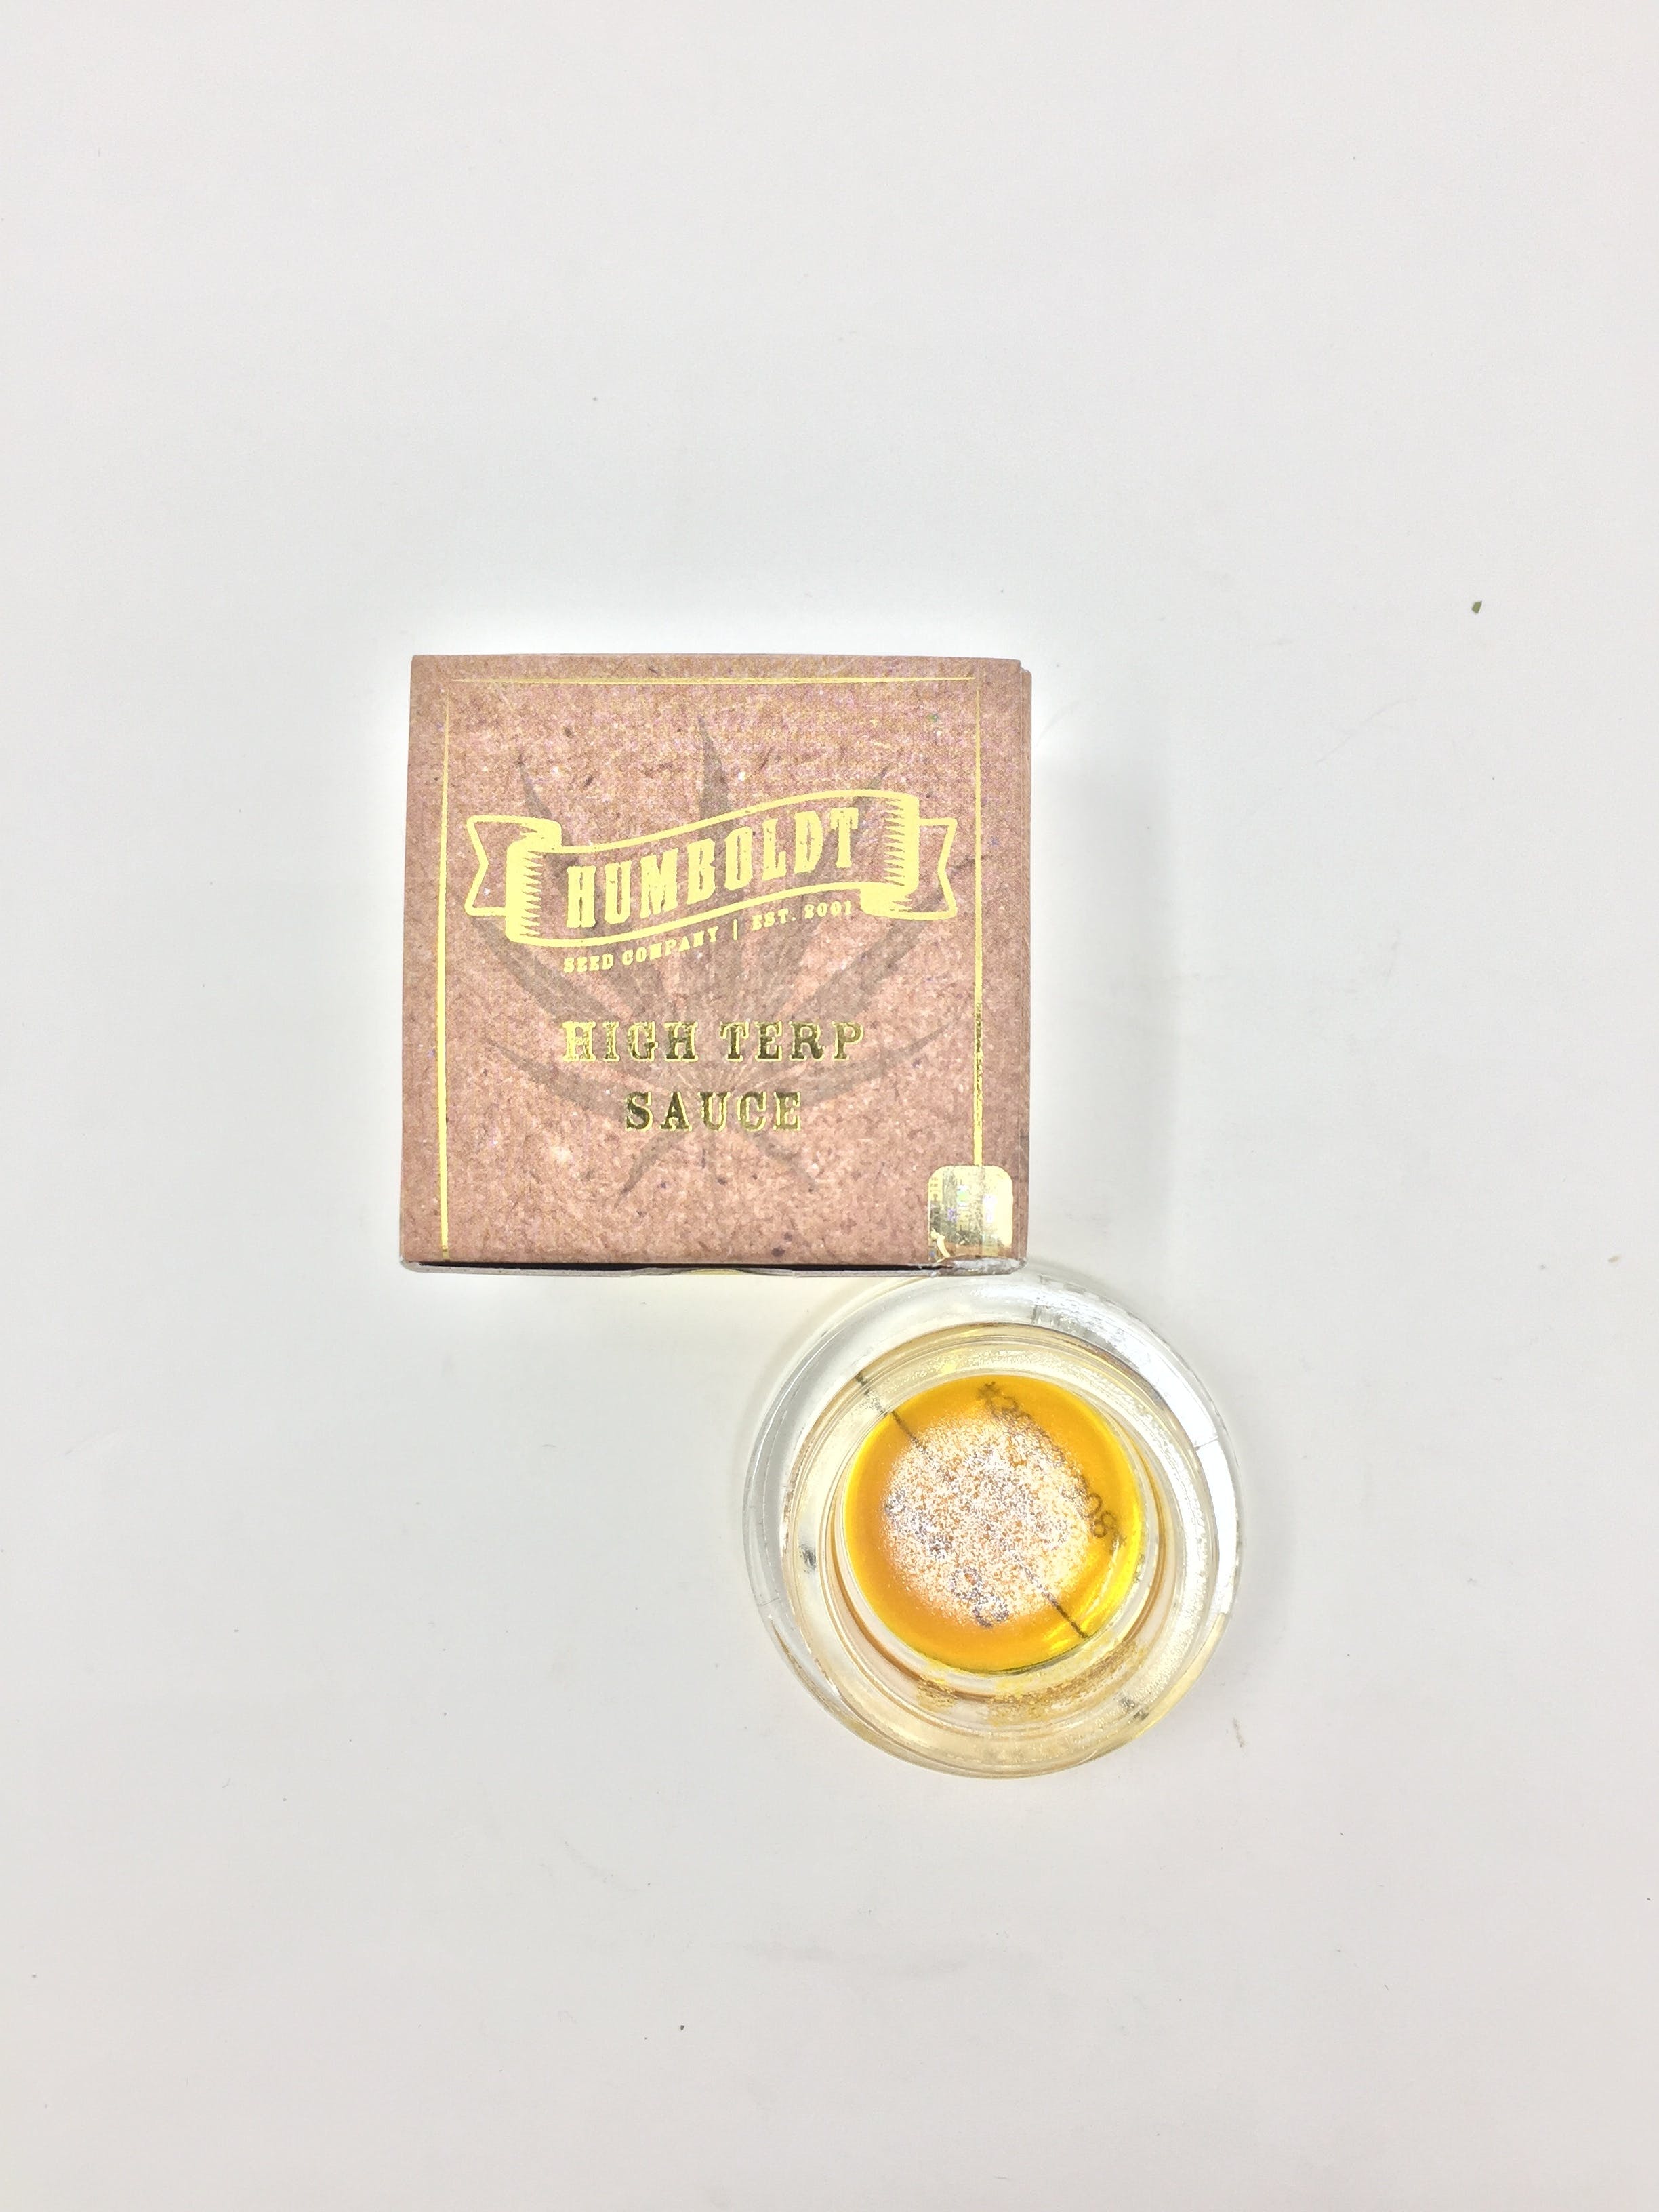 concentrate-humboldt-seed-company-fire-og-terp-sauce-5g